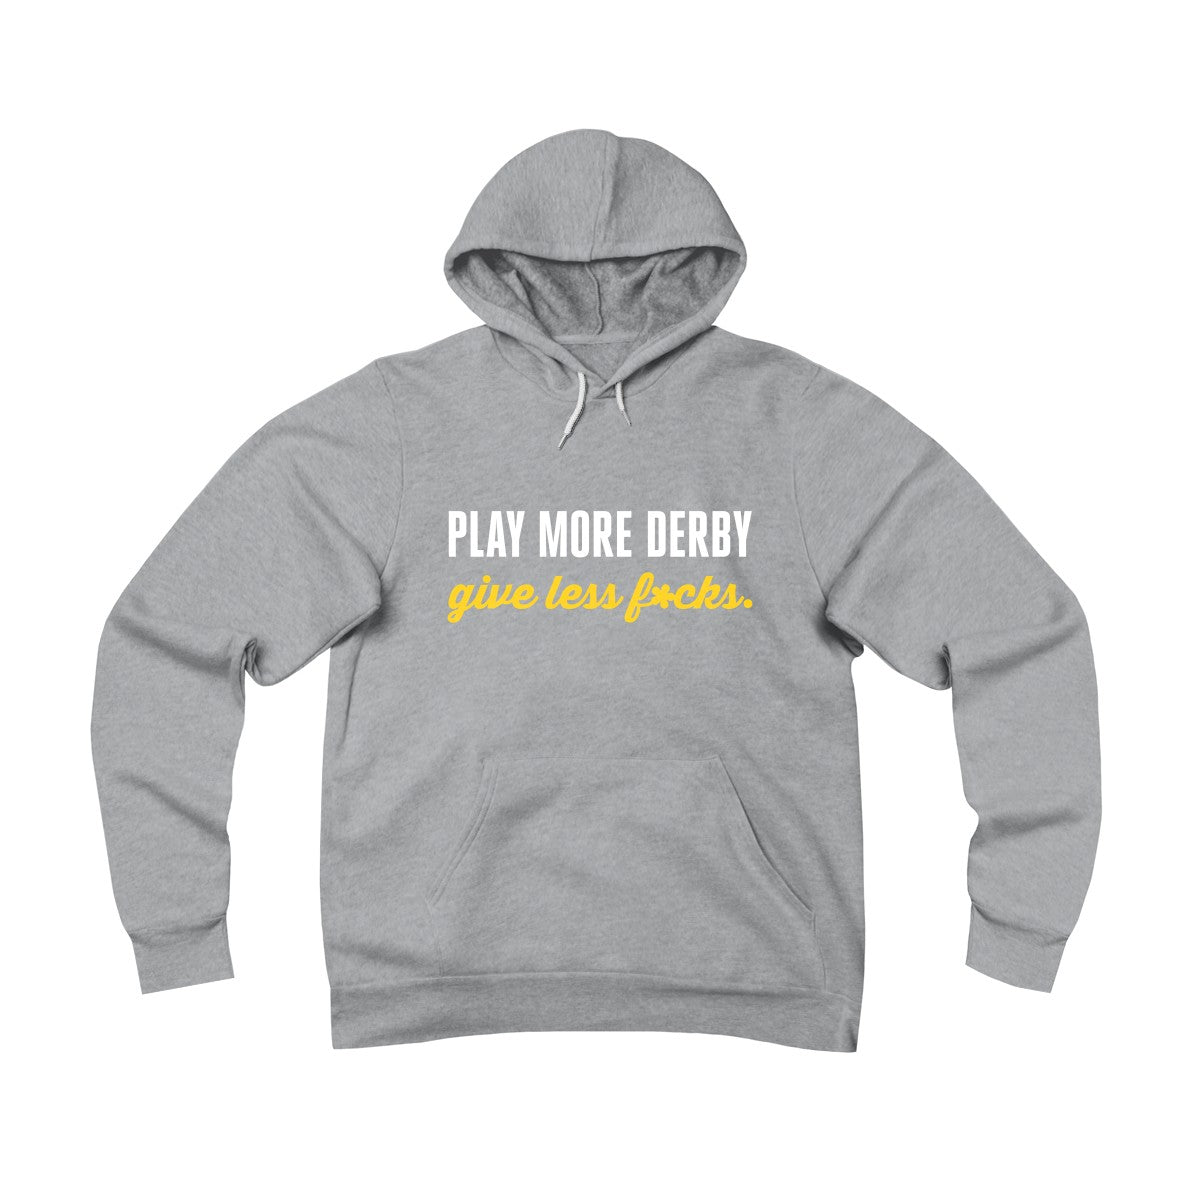 Play more derby, give less f*cks - roller derby hoodie in black, grey, blue or red